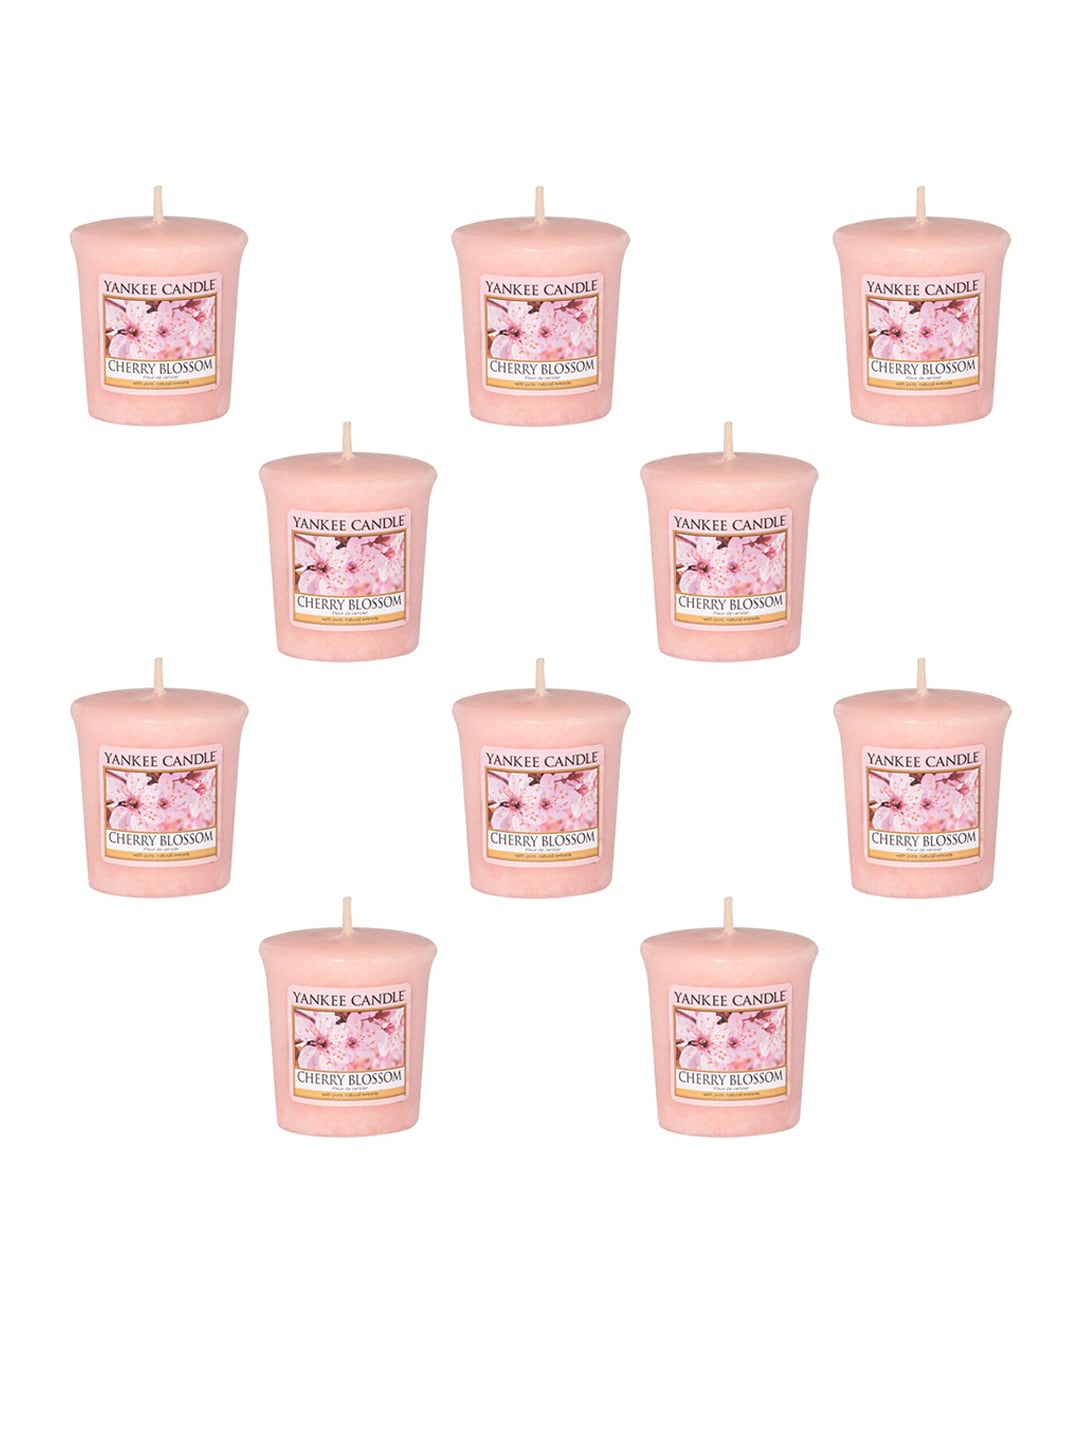 YANKEE CANDLE Set of 10 Cherry Blossom Scented Candles Price in India